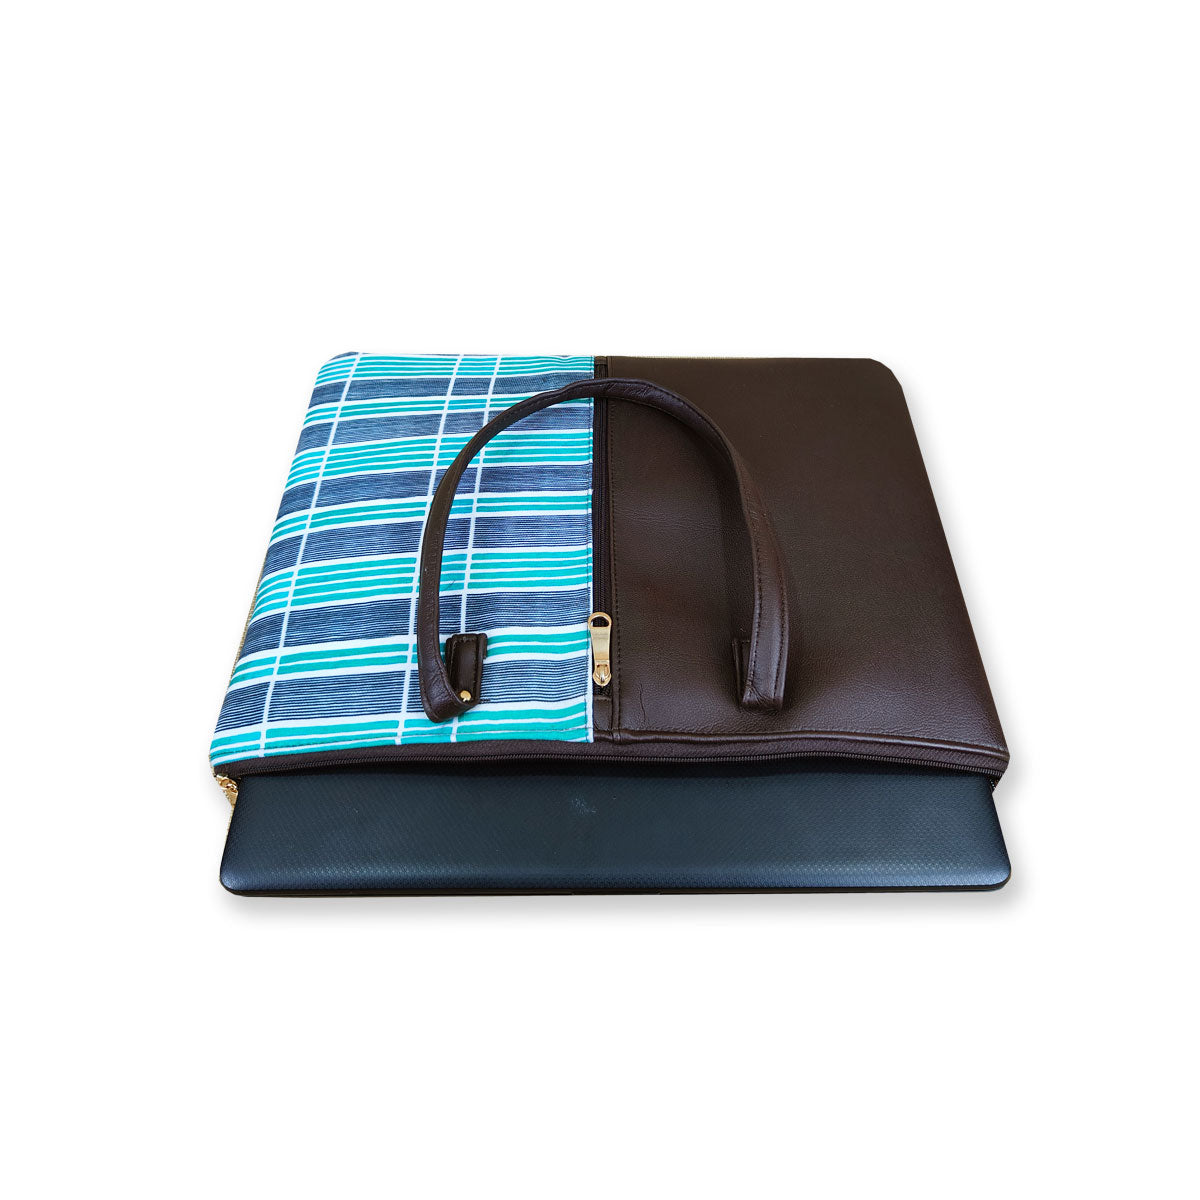 The Mint road Laptop Sleeve